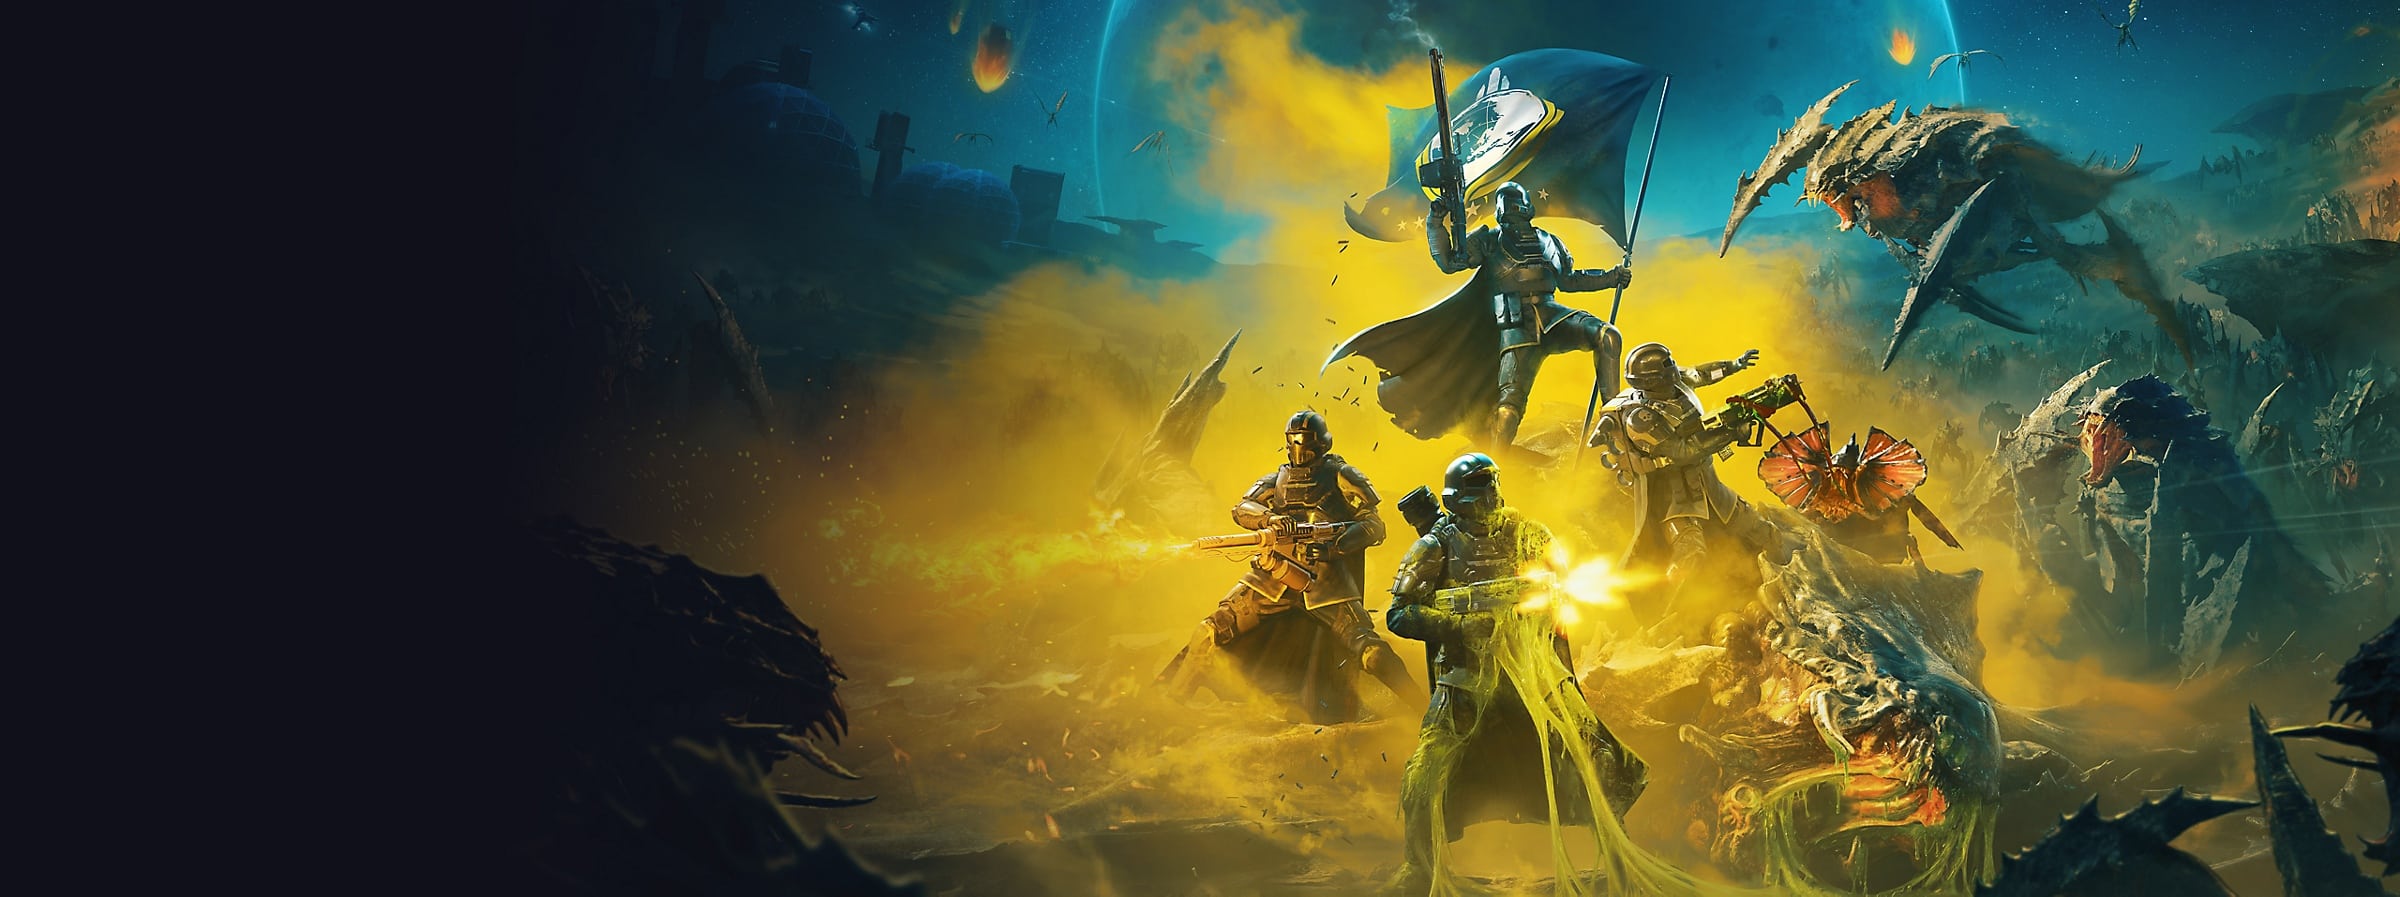 HELLDIVERS 2 Review: A Thrilling Co-op Shooter with Starship Trooper Vibes